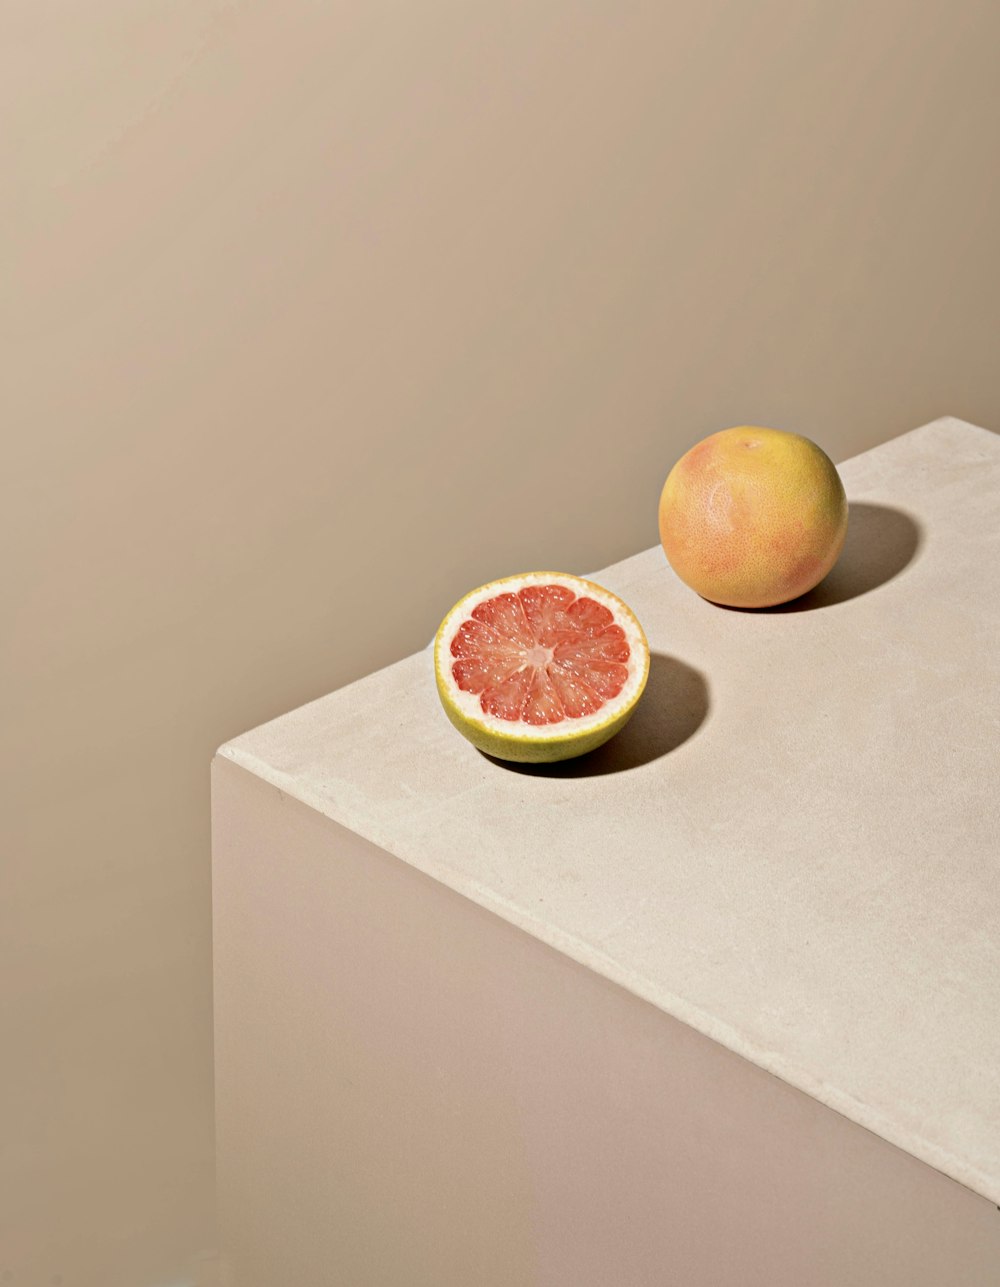 a grapefruit and a grapefruit on a table